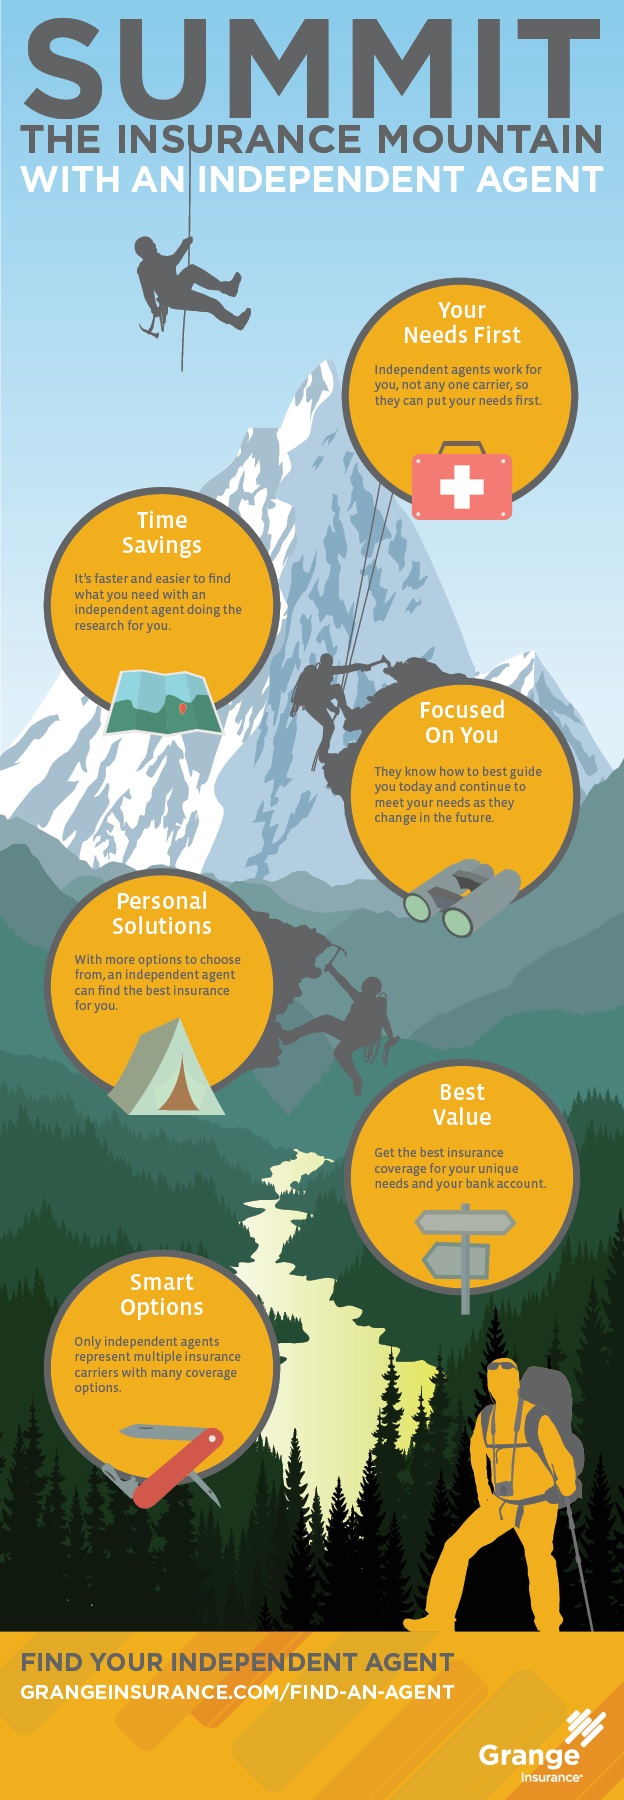 Summit the insurance mountain with an independent agent